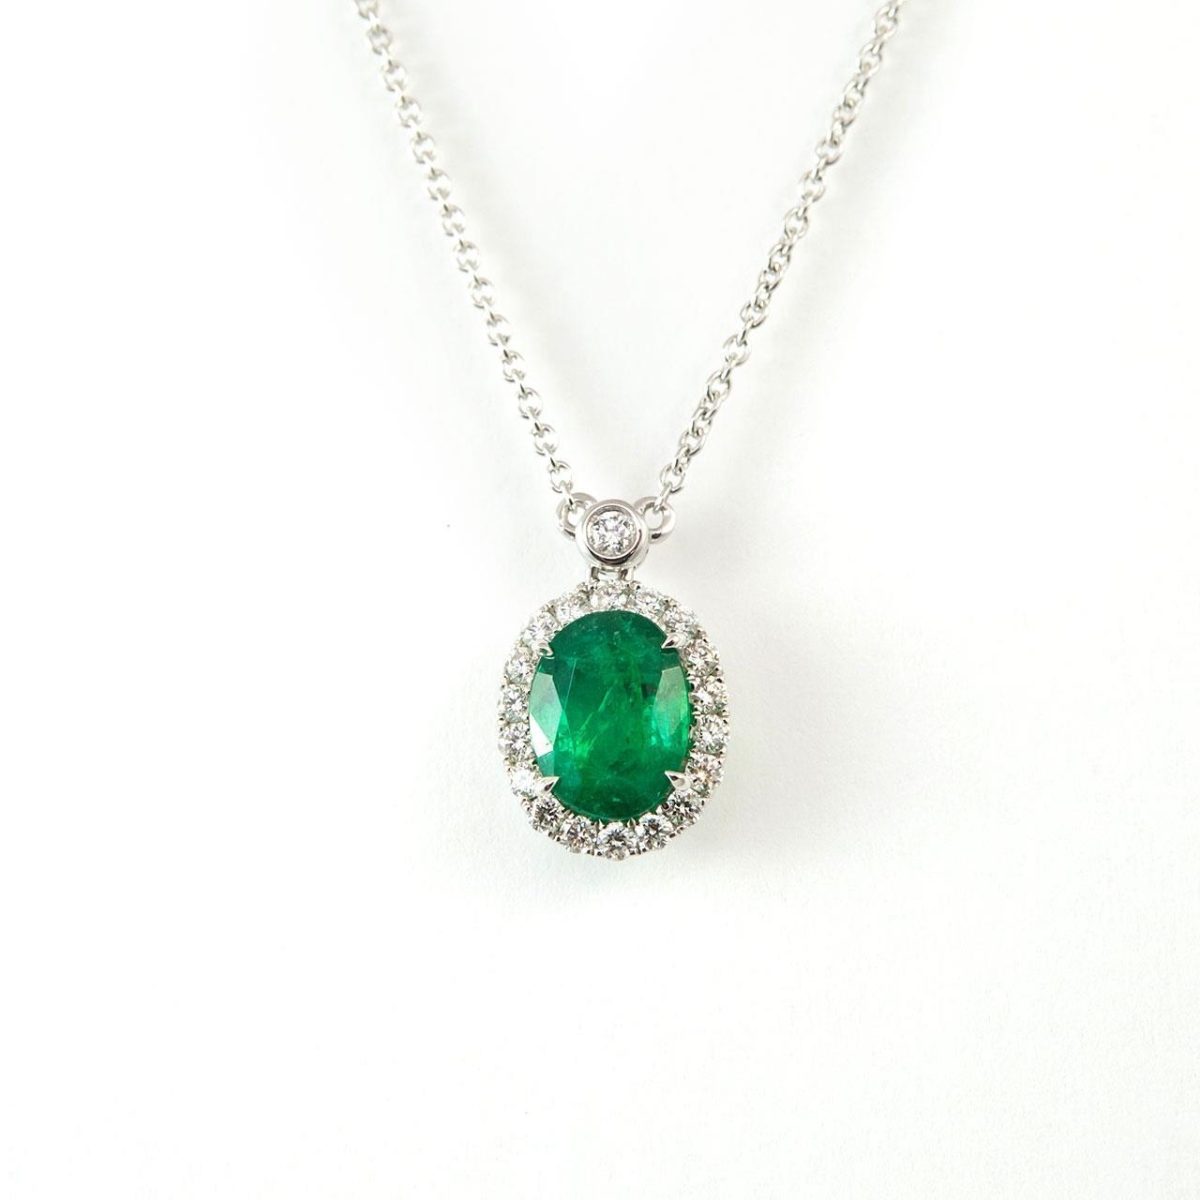 23999 7.50 Ct Emerald With Diamonds Pendant Necklace With Chain